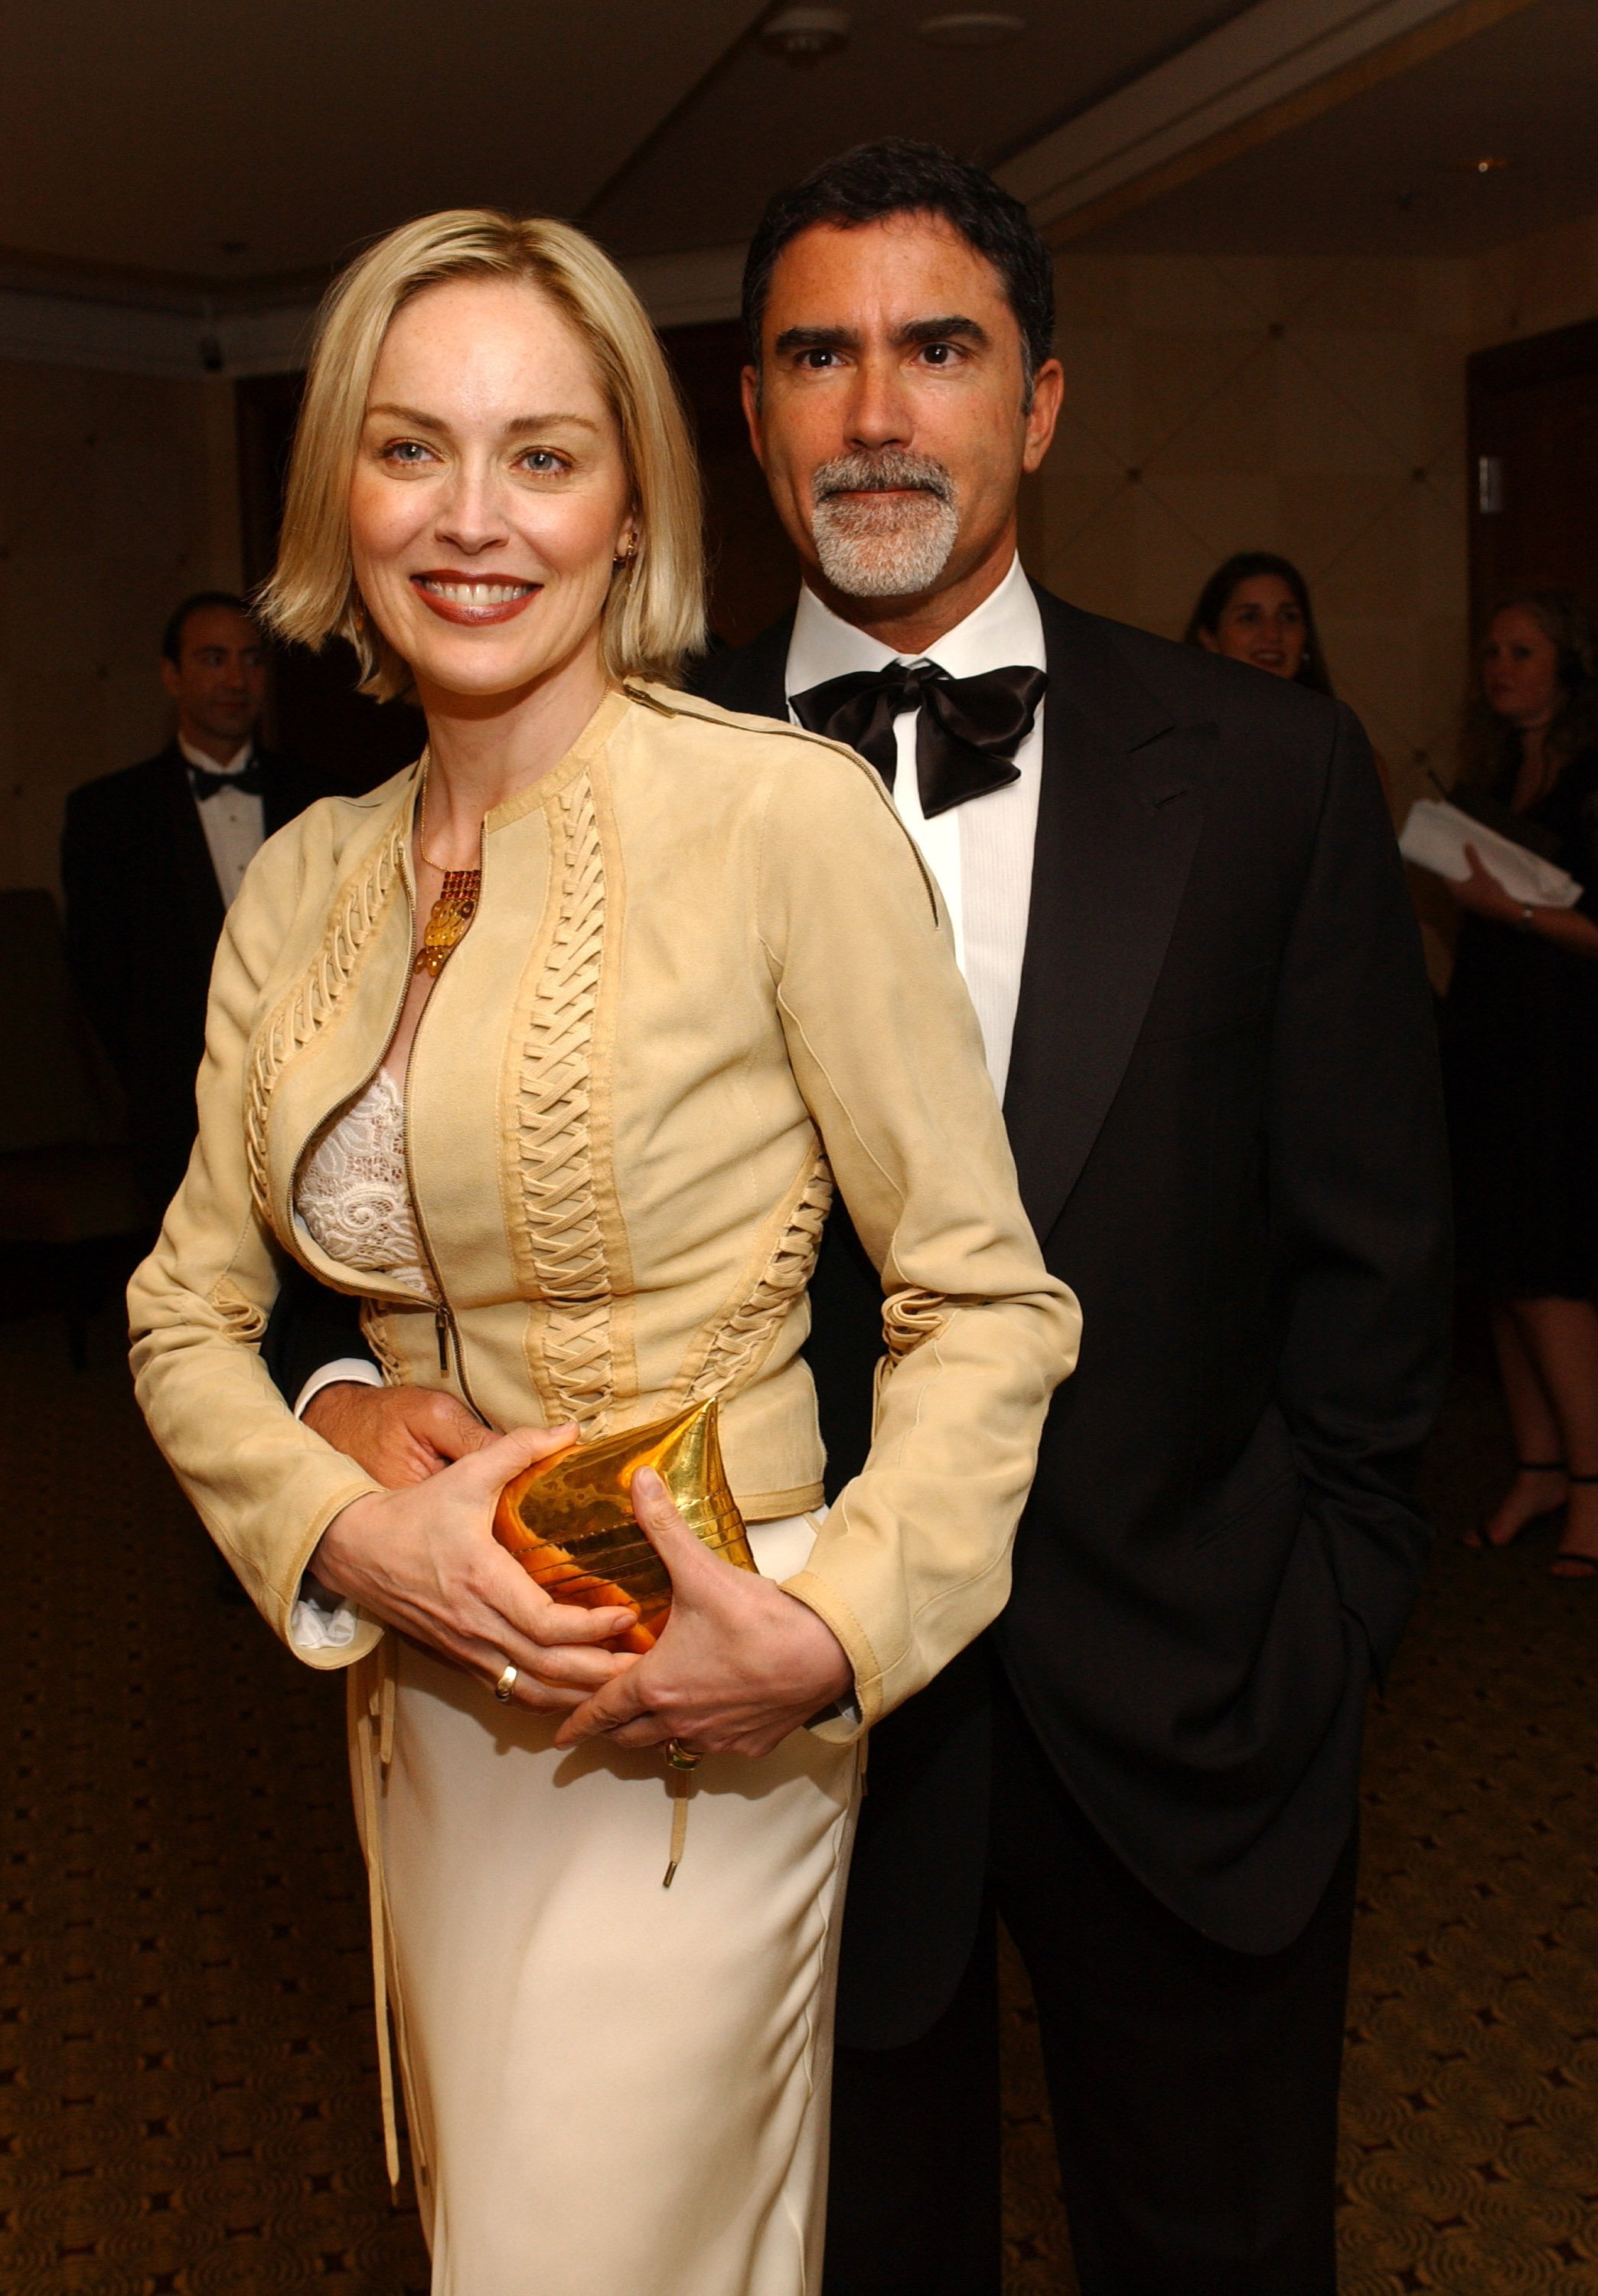 Sharon Stone and Phil Bronstein at the 45th San Francisco International Film Festival - Film Society Awards Night in San Francisco, California, on April 25, 2002. | Source: Arun Nevader/WireImage/Getty Images